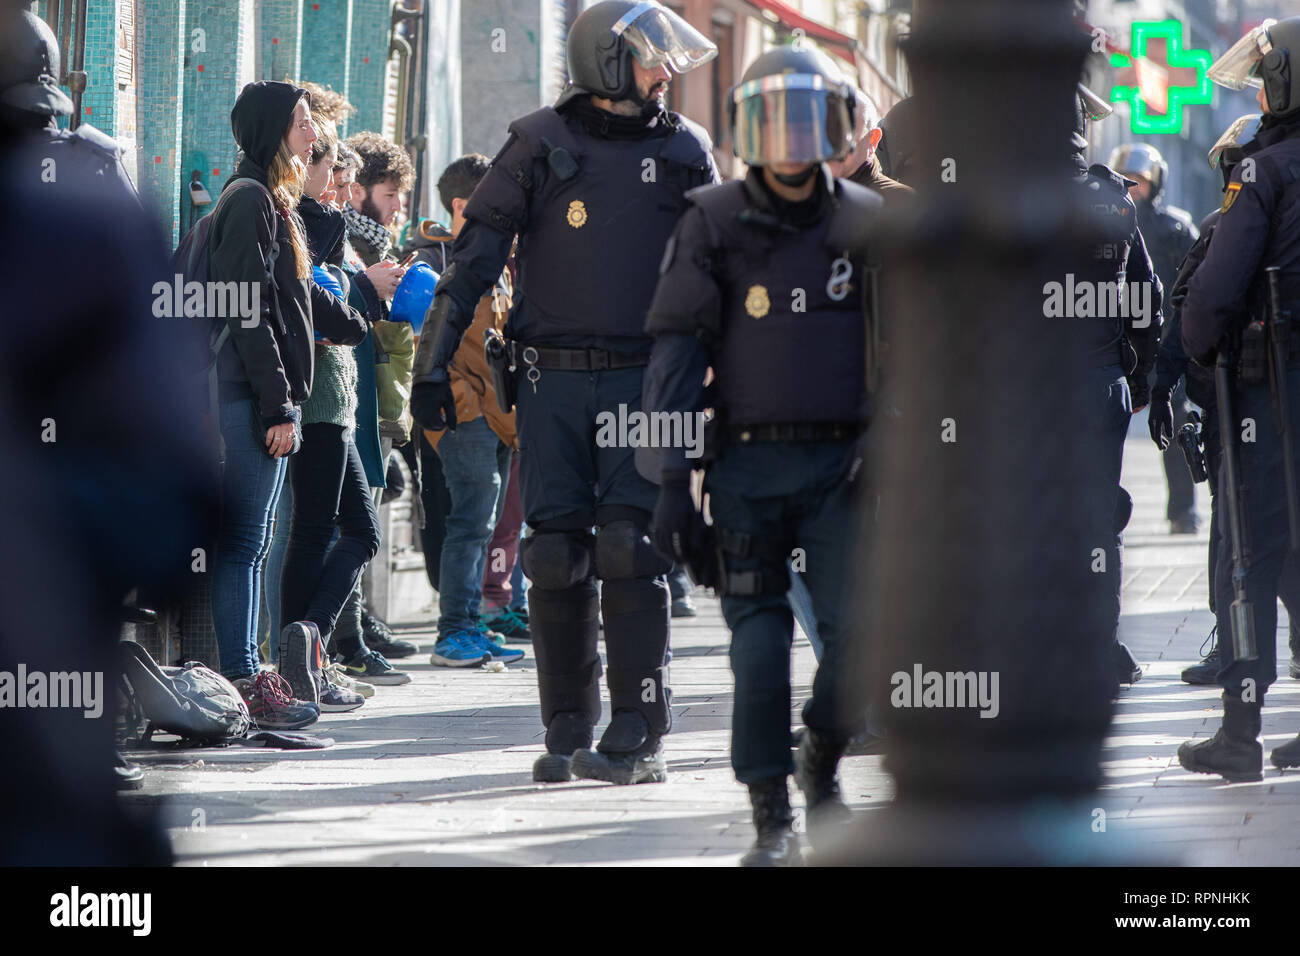 Activists seen arrested by police during the eviction. Four families have had to leave their homes located at 11 Argumosa Street in Madrid because they couldn’t afford the rent that was increased by 300%. The National Police enforced the eviction orders despite the pressure exerted by activists who had gathered there. Stock Photo